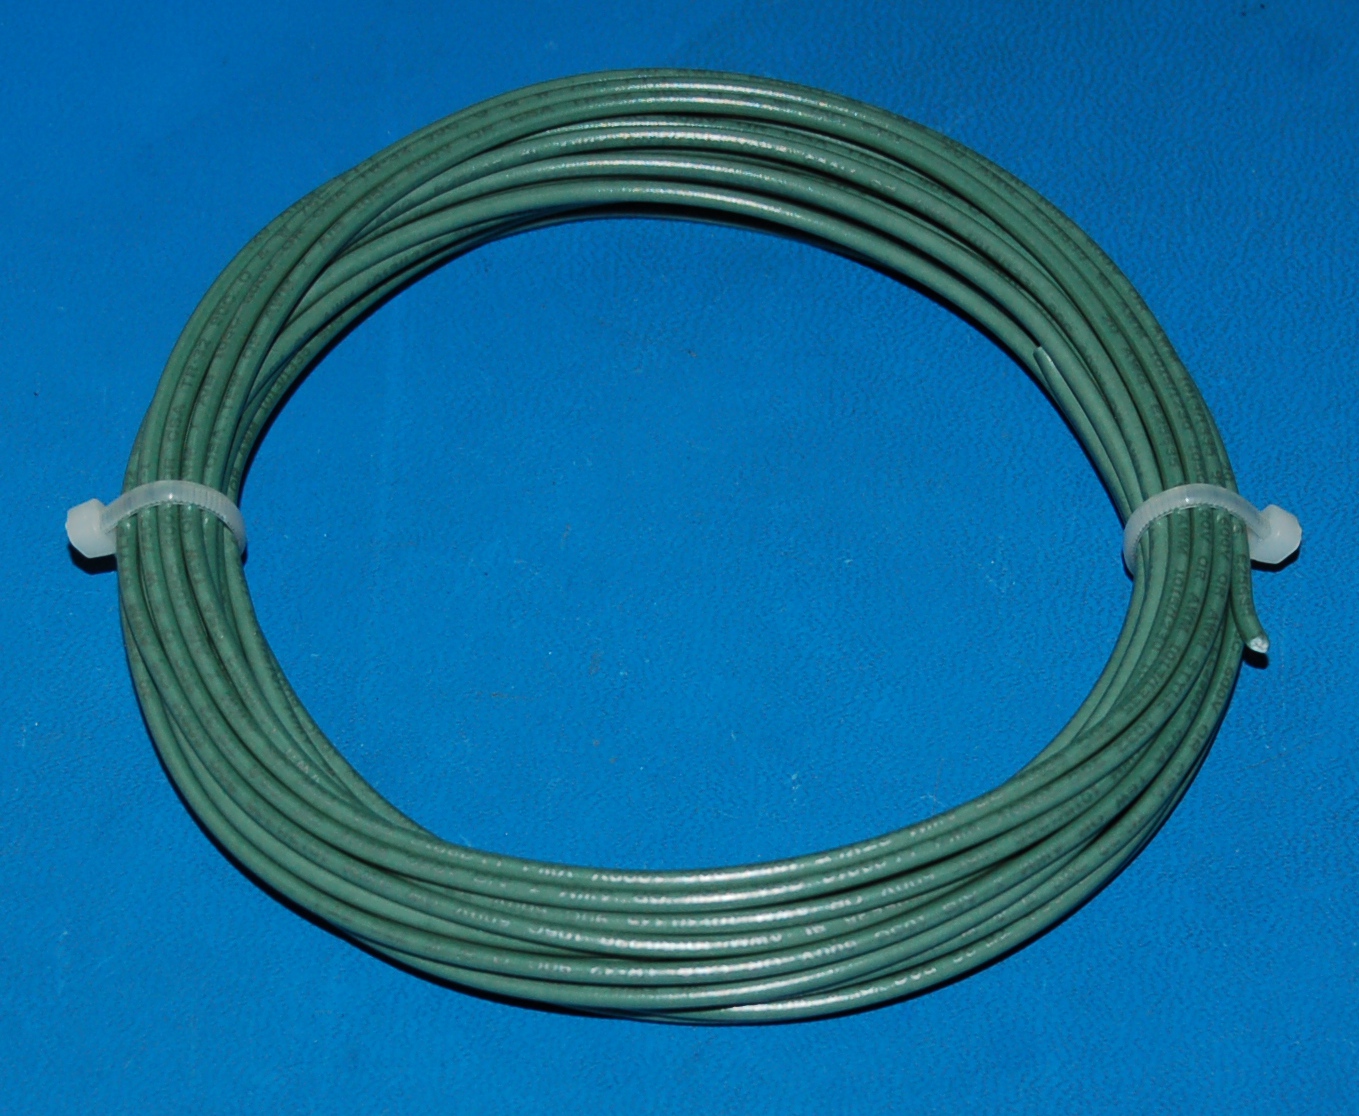 Solid Tinned Copper Wire, 1000V, #20 AWG x 50' (Green)